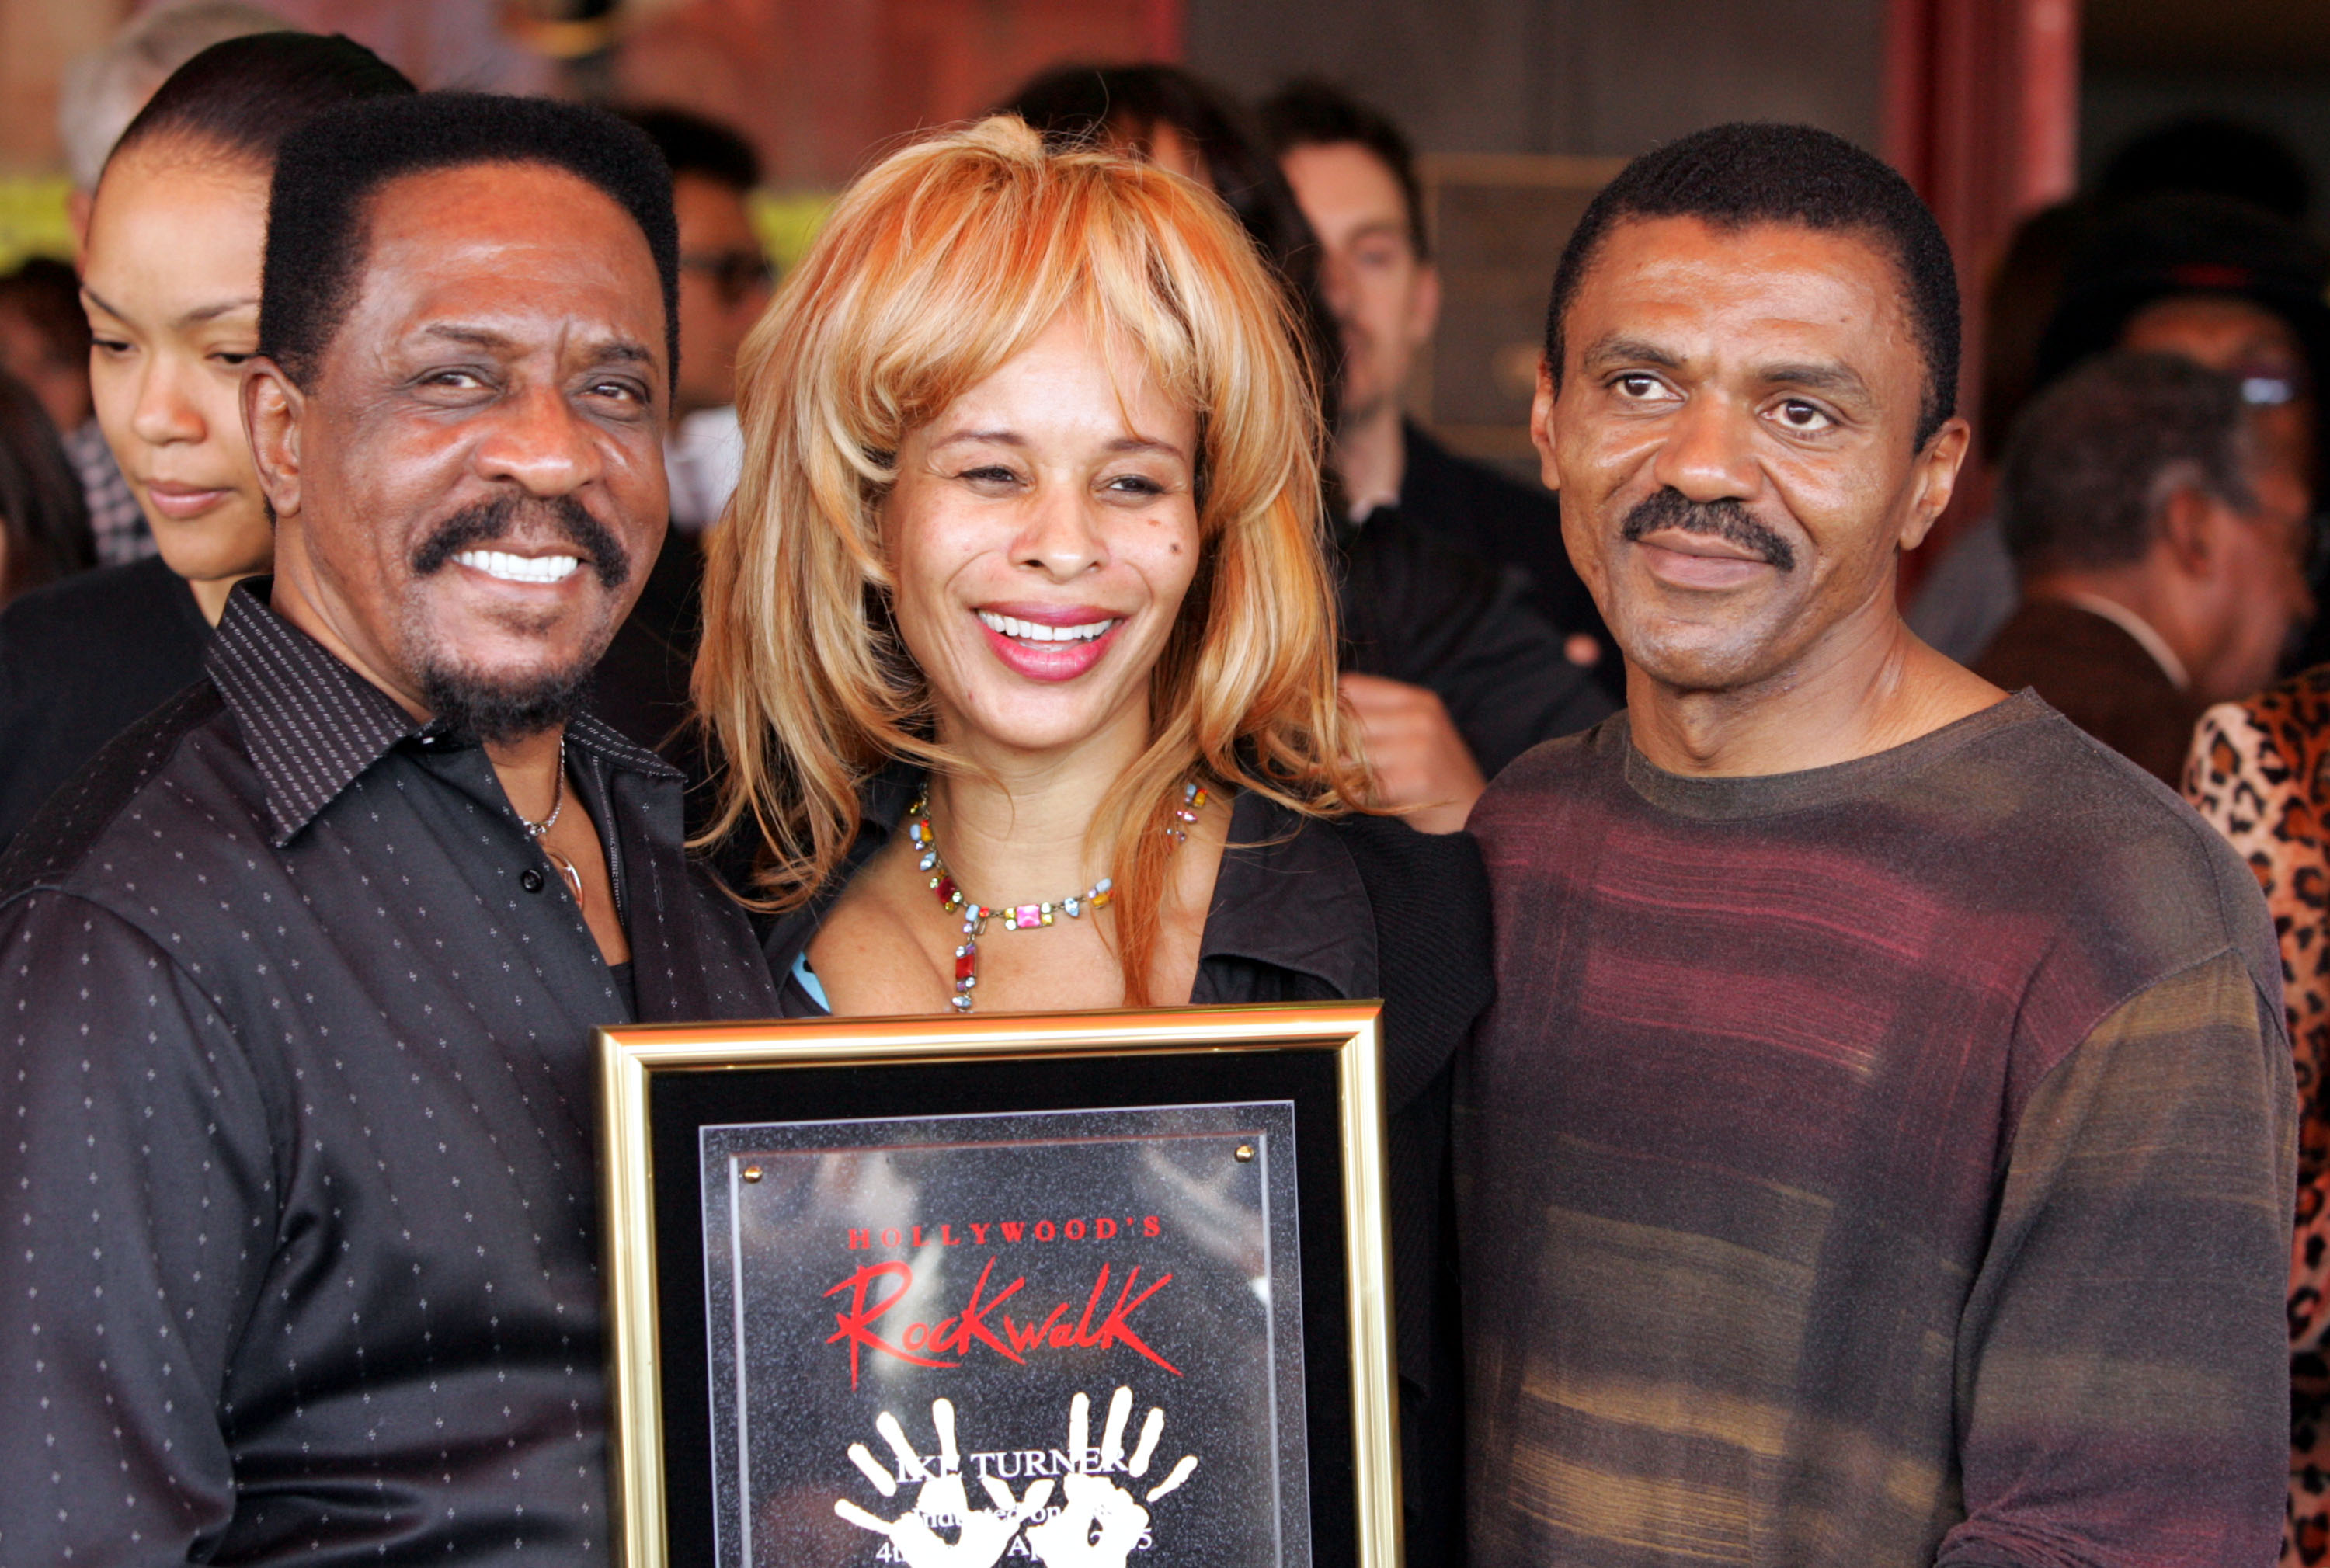 Ike Turner (L) stands with guest Audrey Madison and Ike Turner Jr. after he was inducted into the Hollywood Rockwalk along with Muddy Waters, Robert Cray, Solomon Burke and Etta James on April 4, 2005 in Hollywood, California. | Source: Getty Images